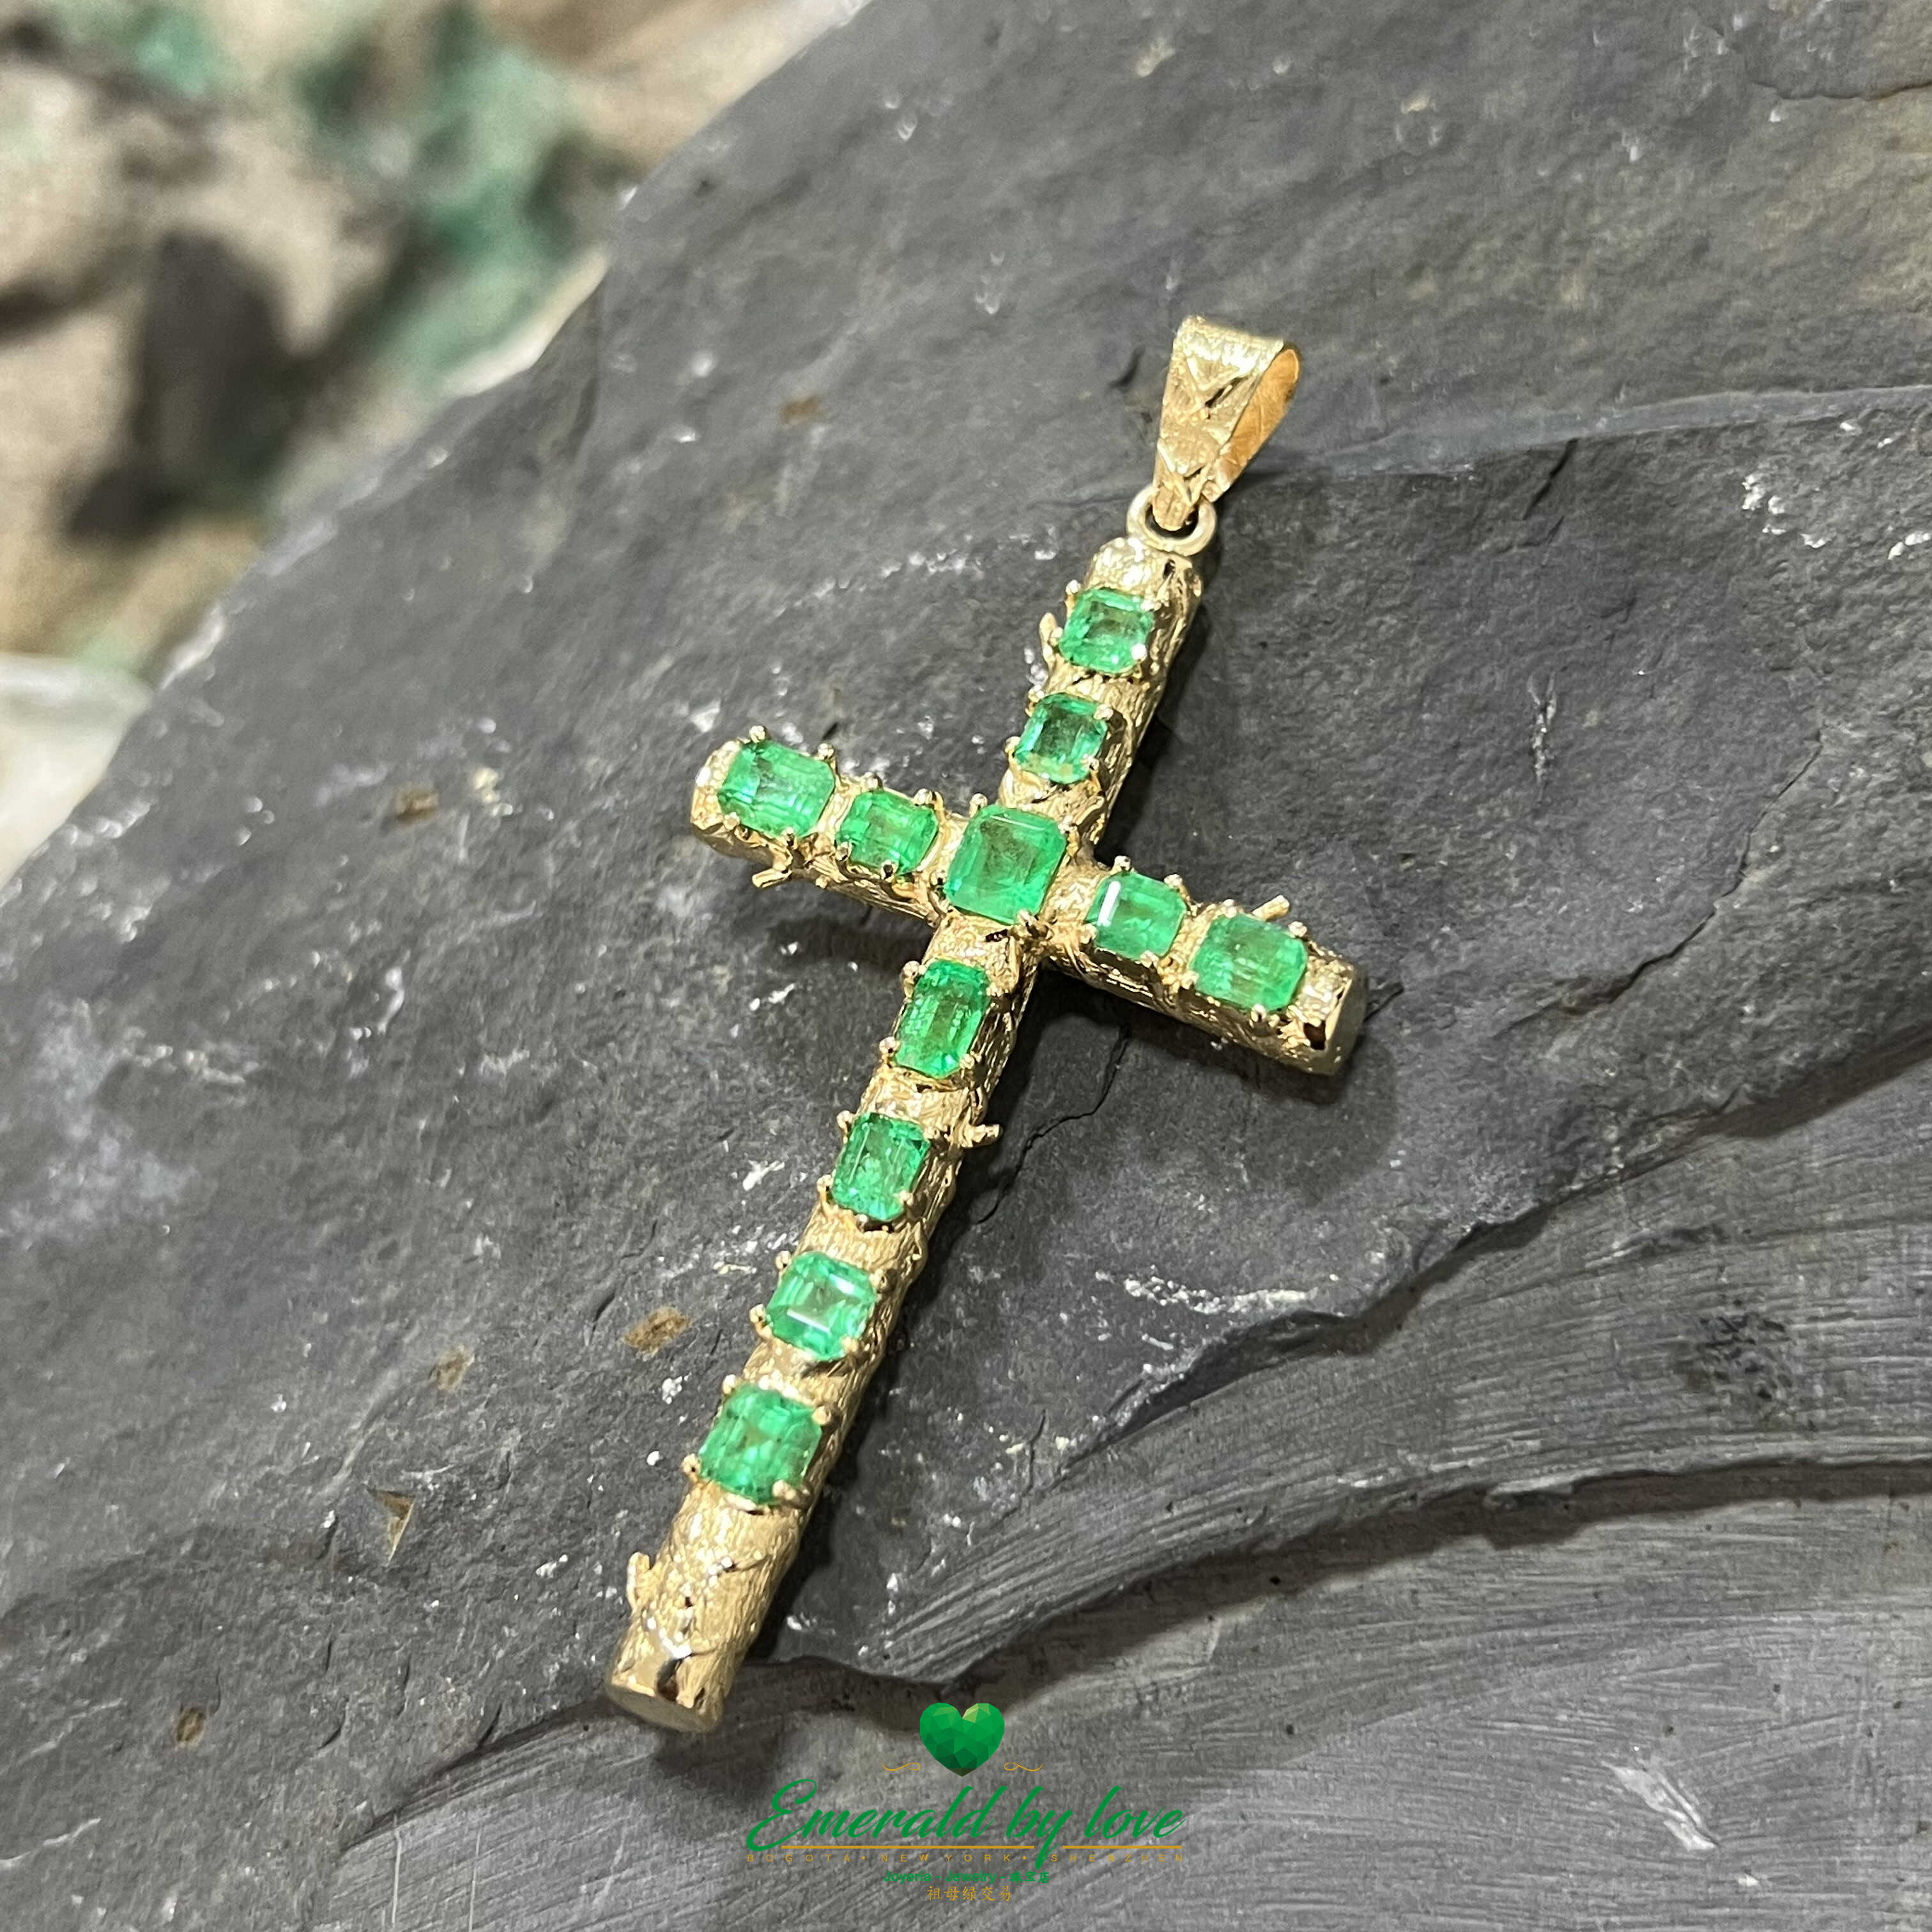 Intriguing 18k Yellow Gold Cross Pendant with Genuine Colombian Square Emeralds